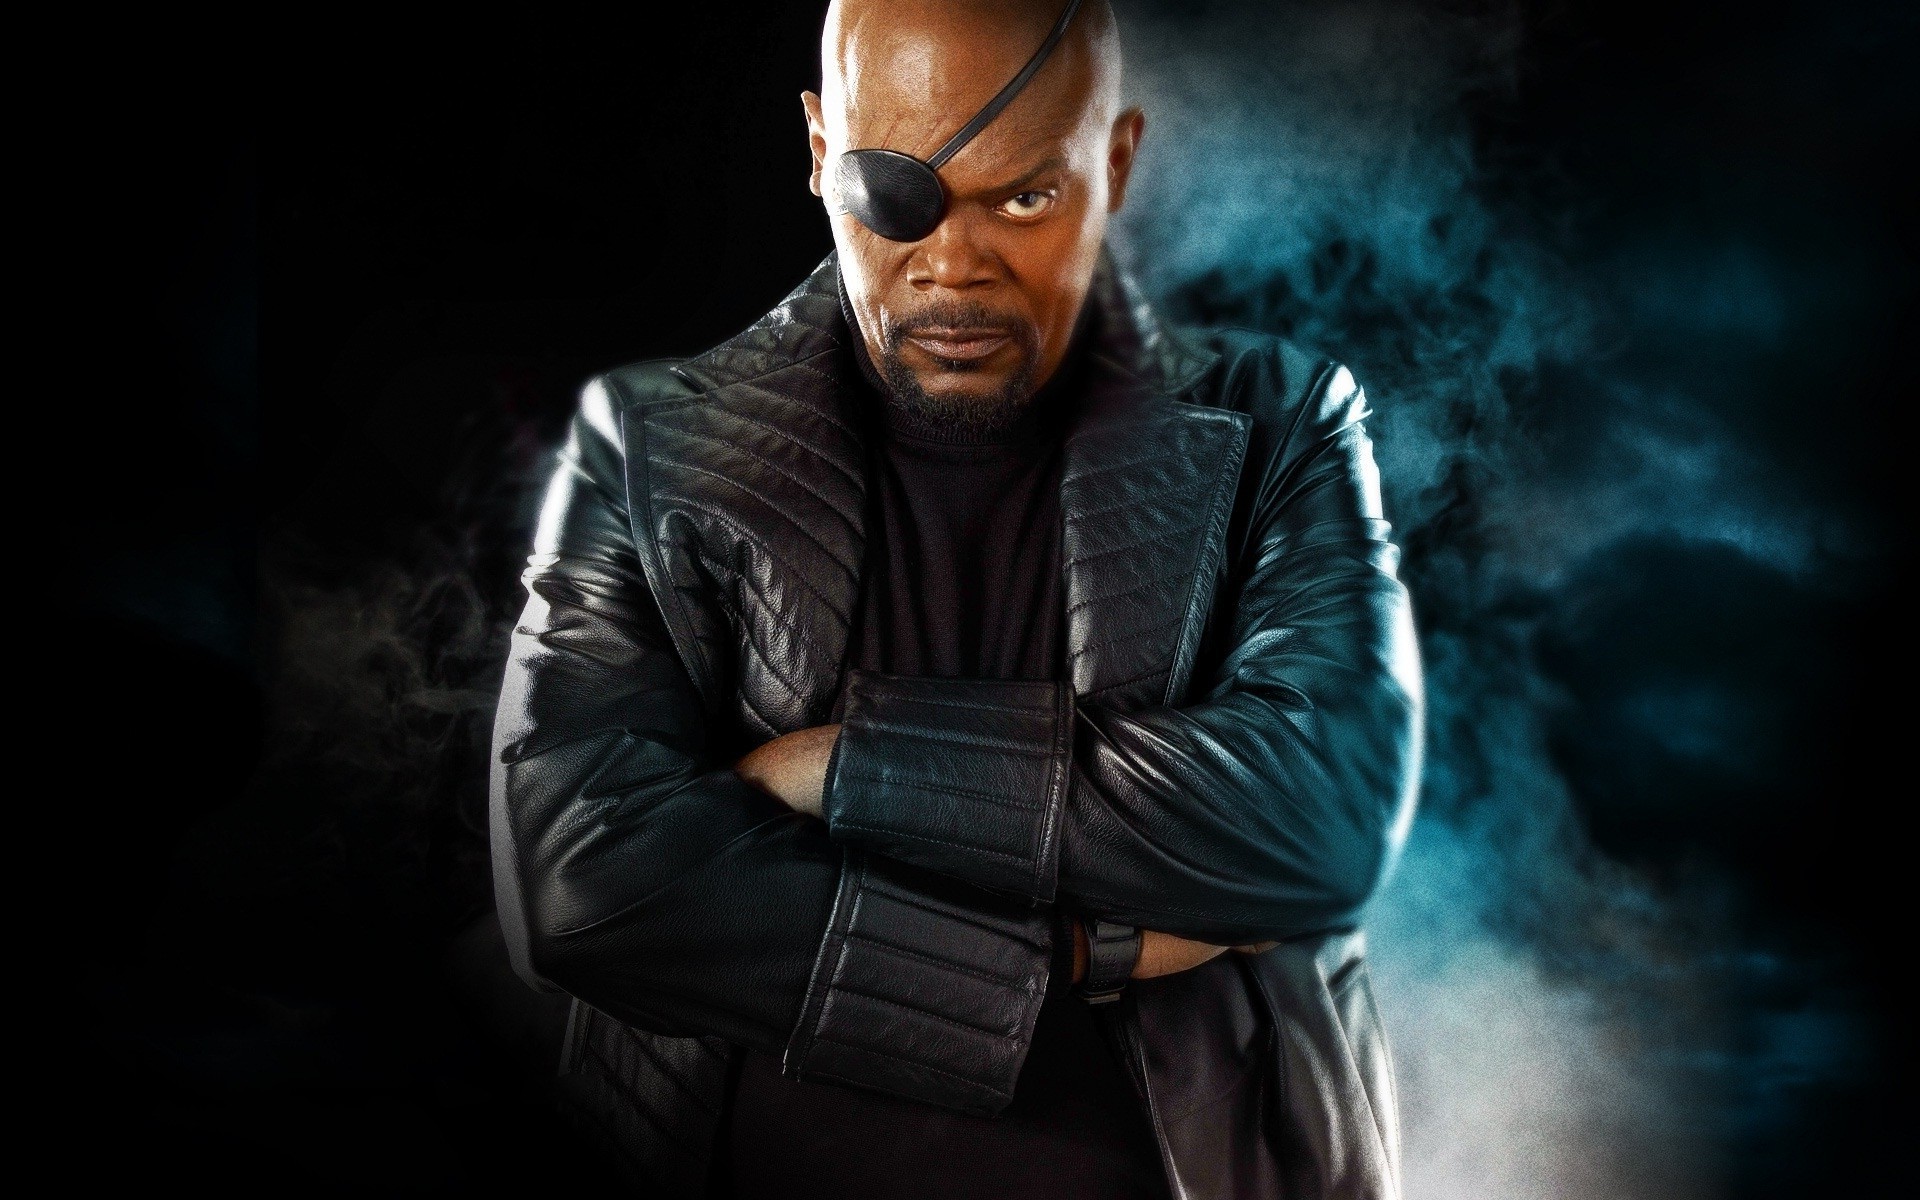 Samuel L. Jackson, Nick Fury, Eyepatches, Arms Crossed, Captain America: The Winter Soldier, Arms On Chest, Angry Wallpaper